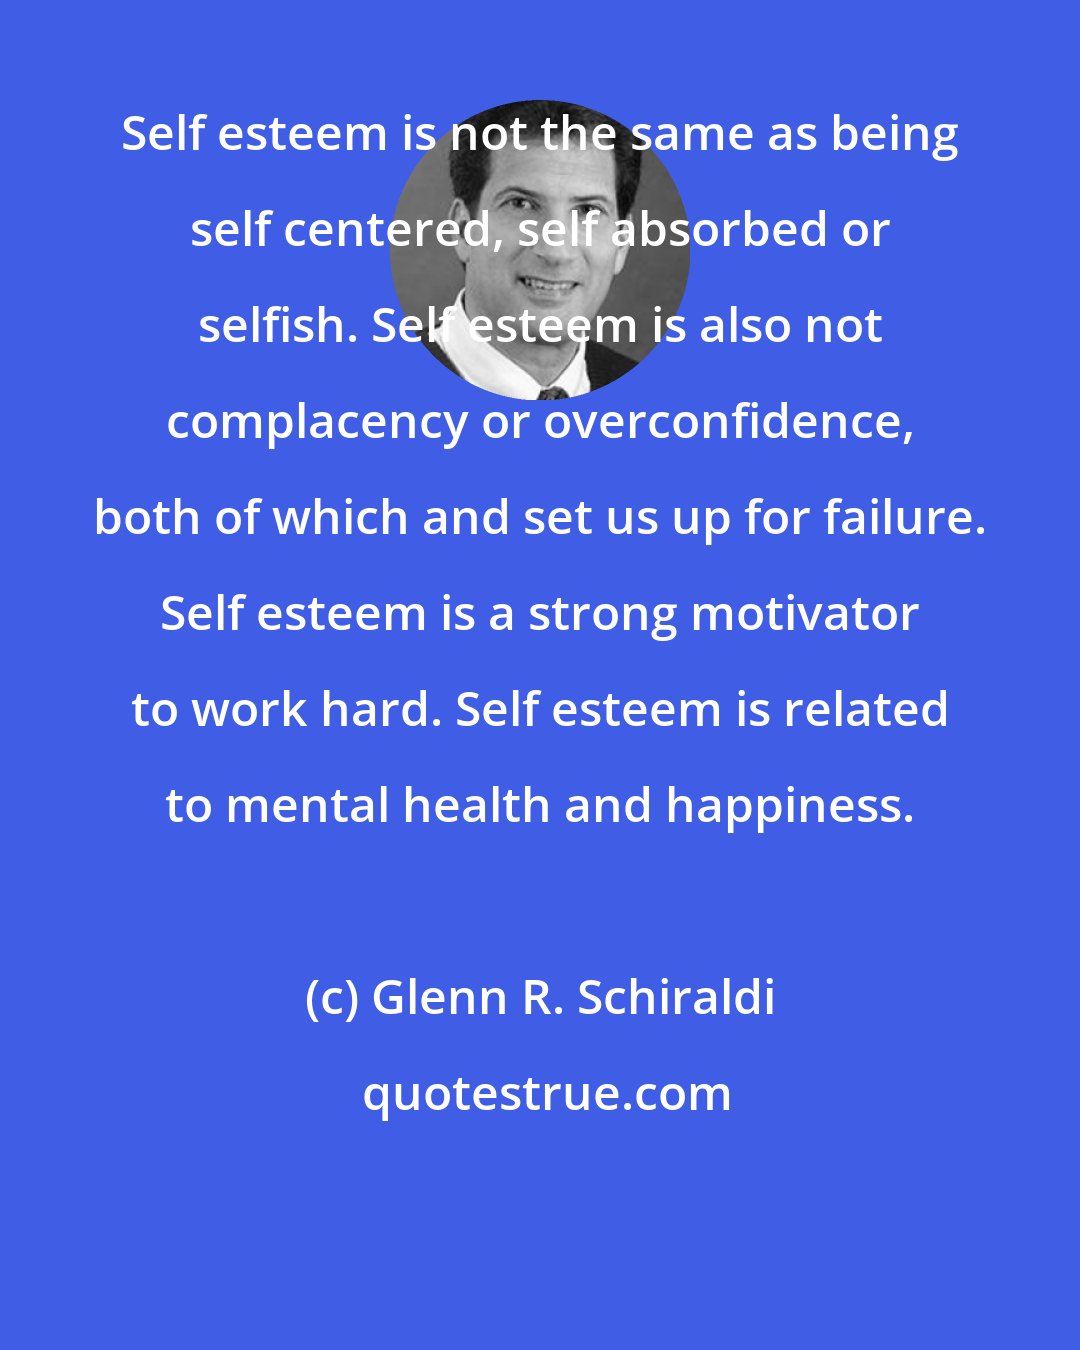 Glenn R. Schiraldi: Self esteem is not the same as being self centered, self absorbed or selfish. Self esteem is also not complacency or overconfidence, both of which and set us up for failure. Self esteem is a strong motivator to work hard. Self esteem is related to mental health and happiness.